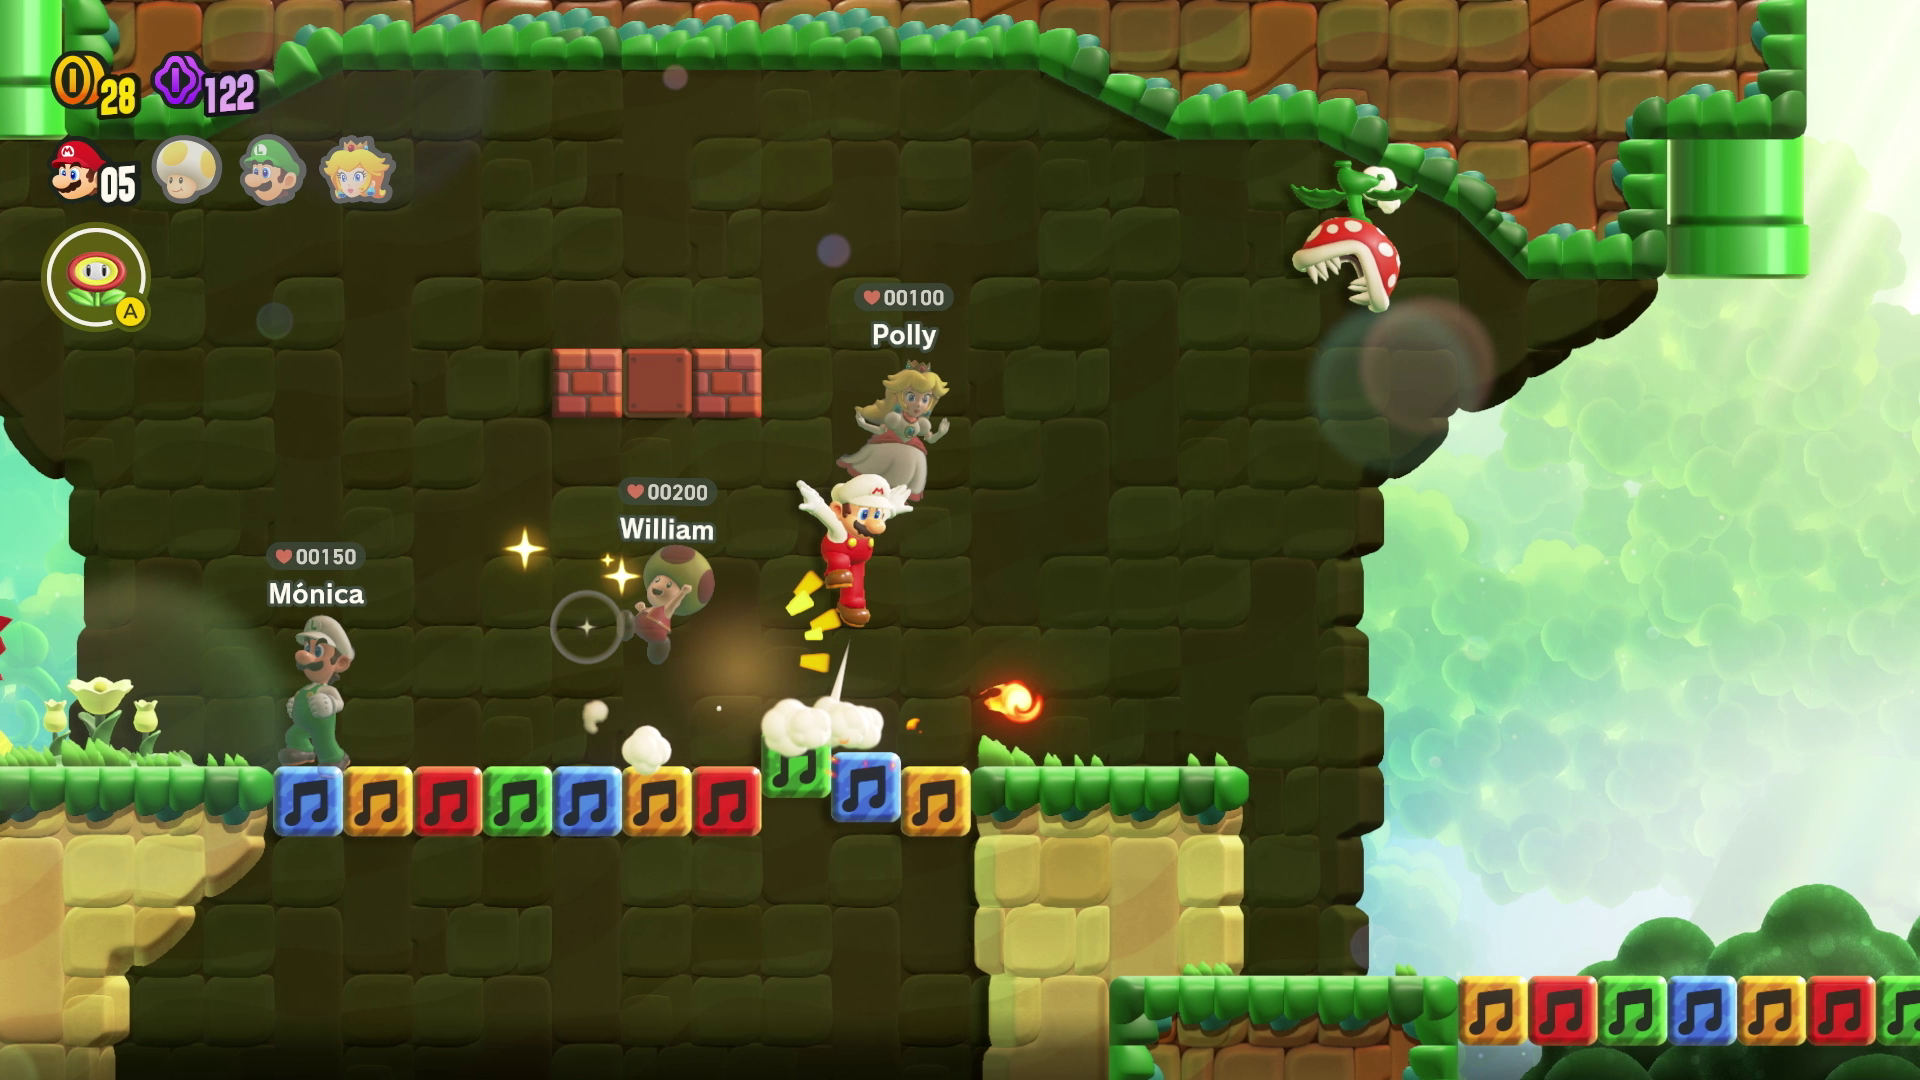 Super Mario Bros. Wonder: A Dazzling New Adventure with a Notable Online  Multiplayer Shortcoming. Gaming news - eSports events review, analytics,  announcements, interviews, statistics - se_3fWkSl